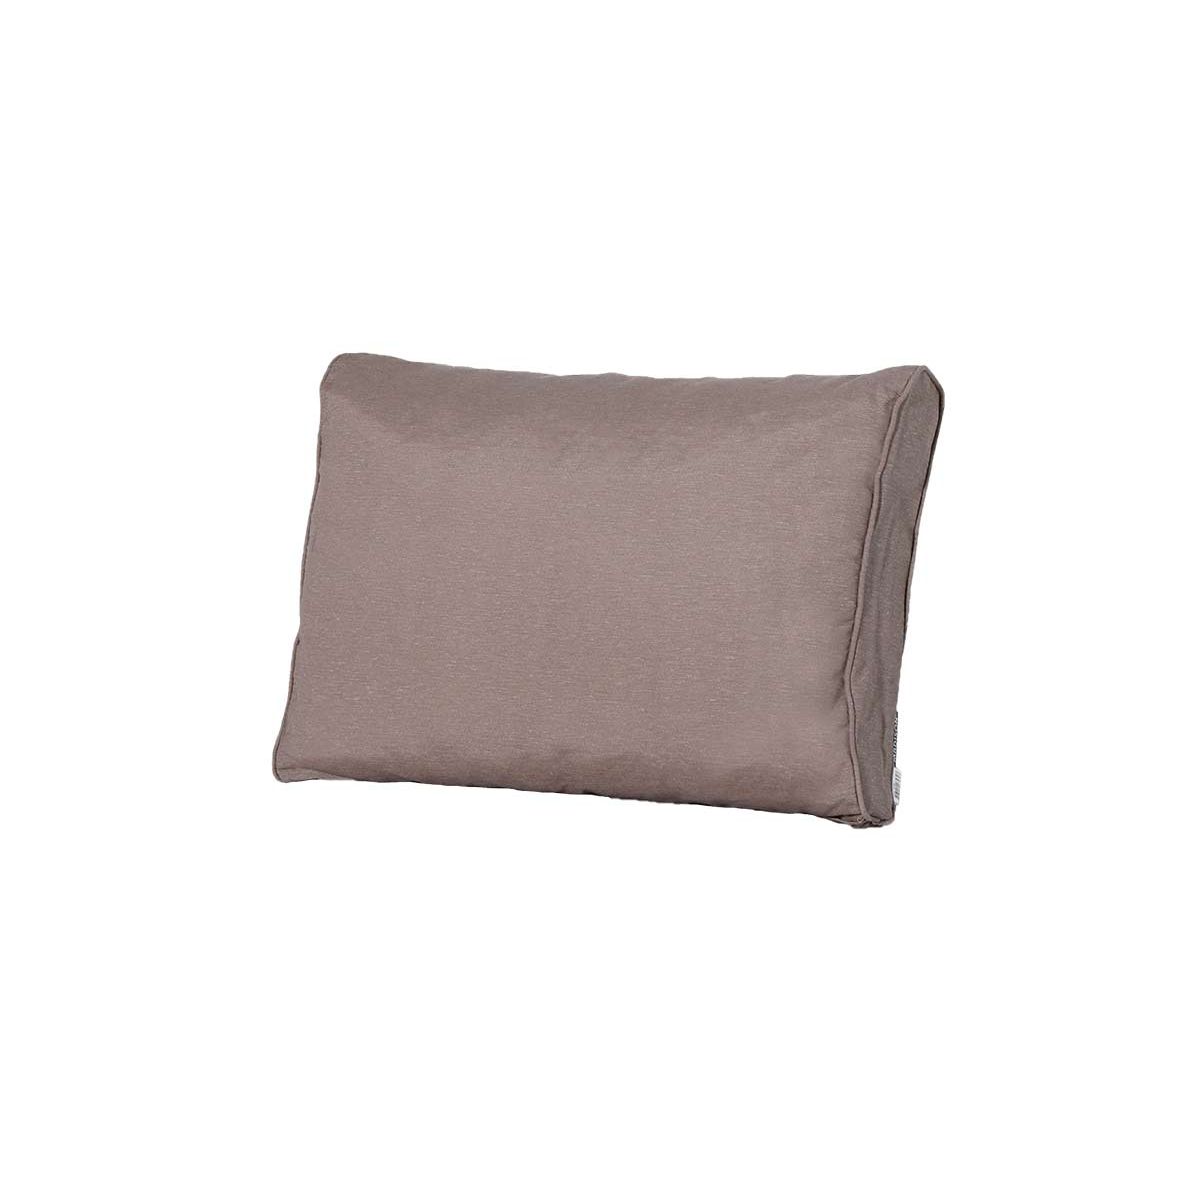 MADISON Coussin palette dossier Panama Taupe 60 x 40 cm